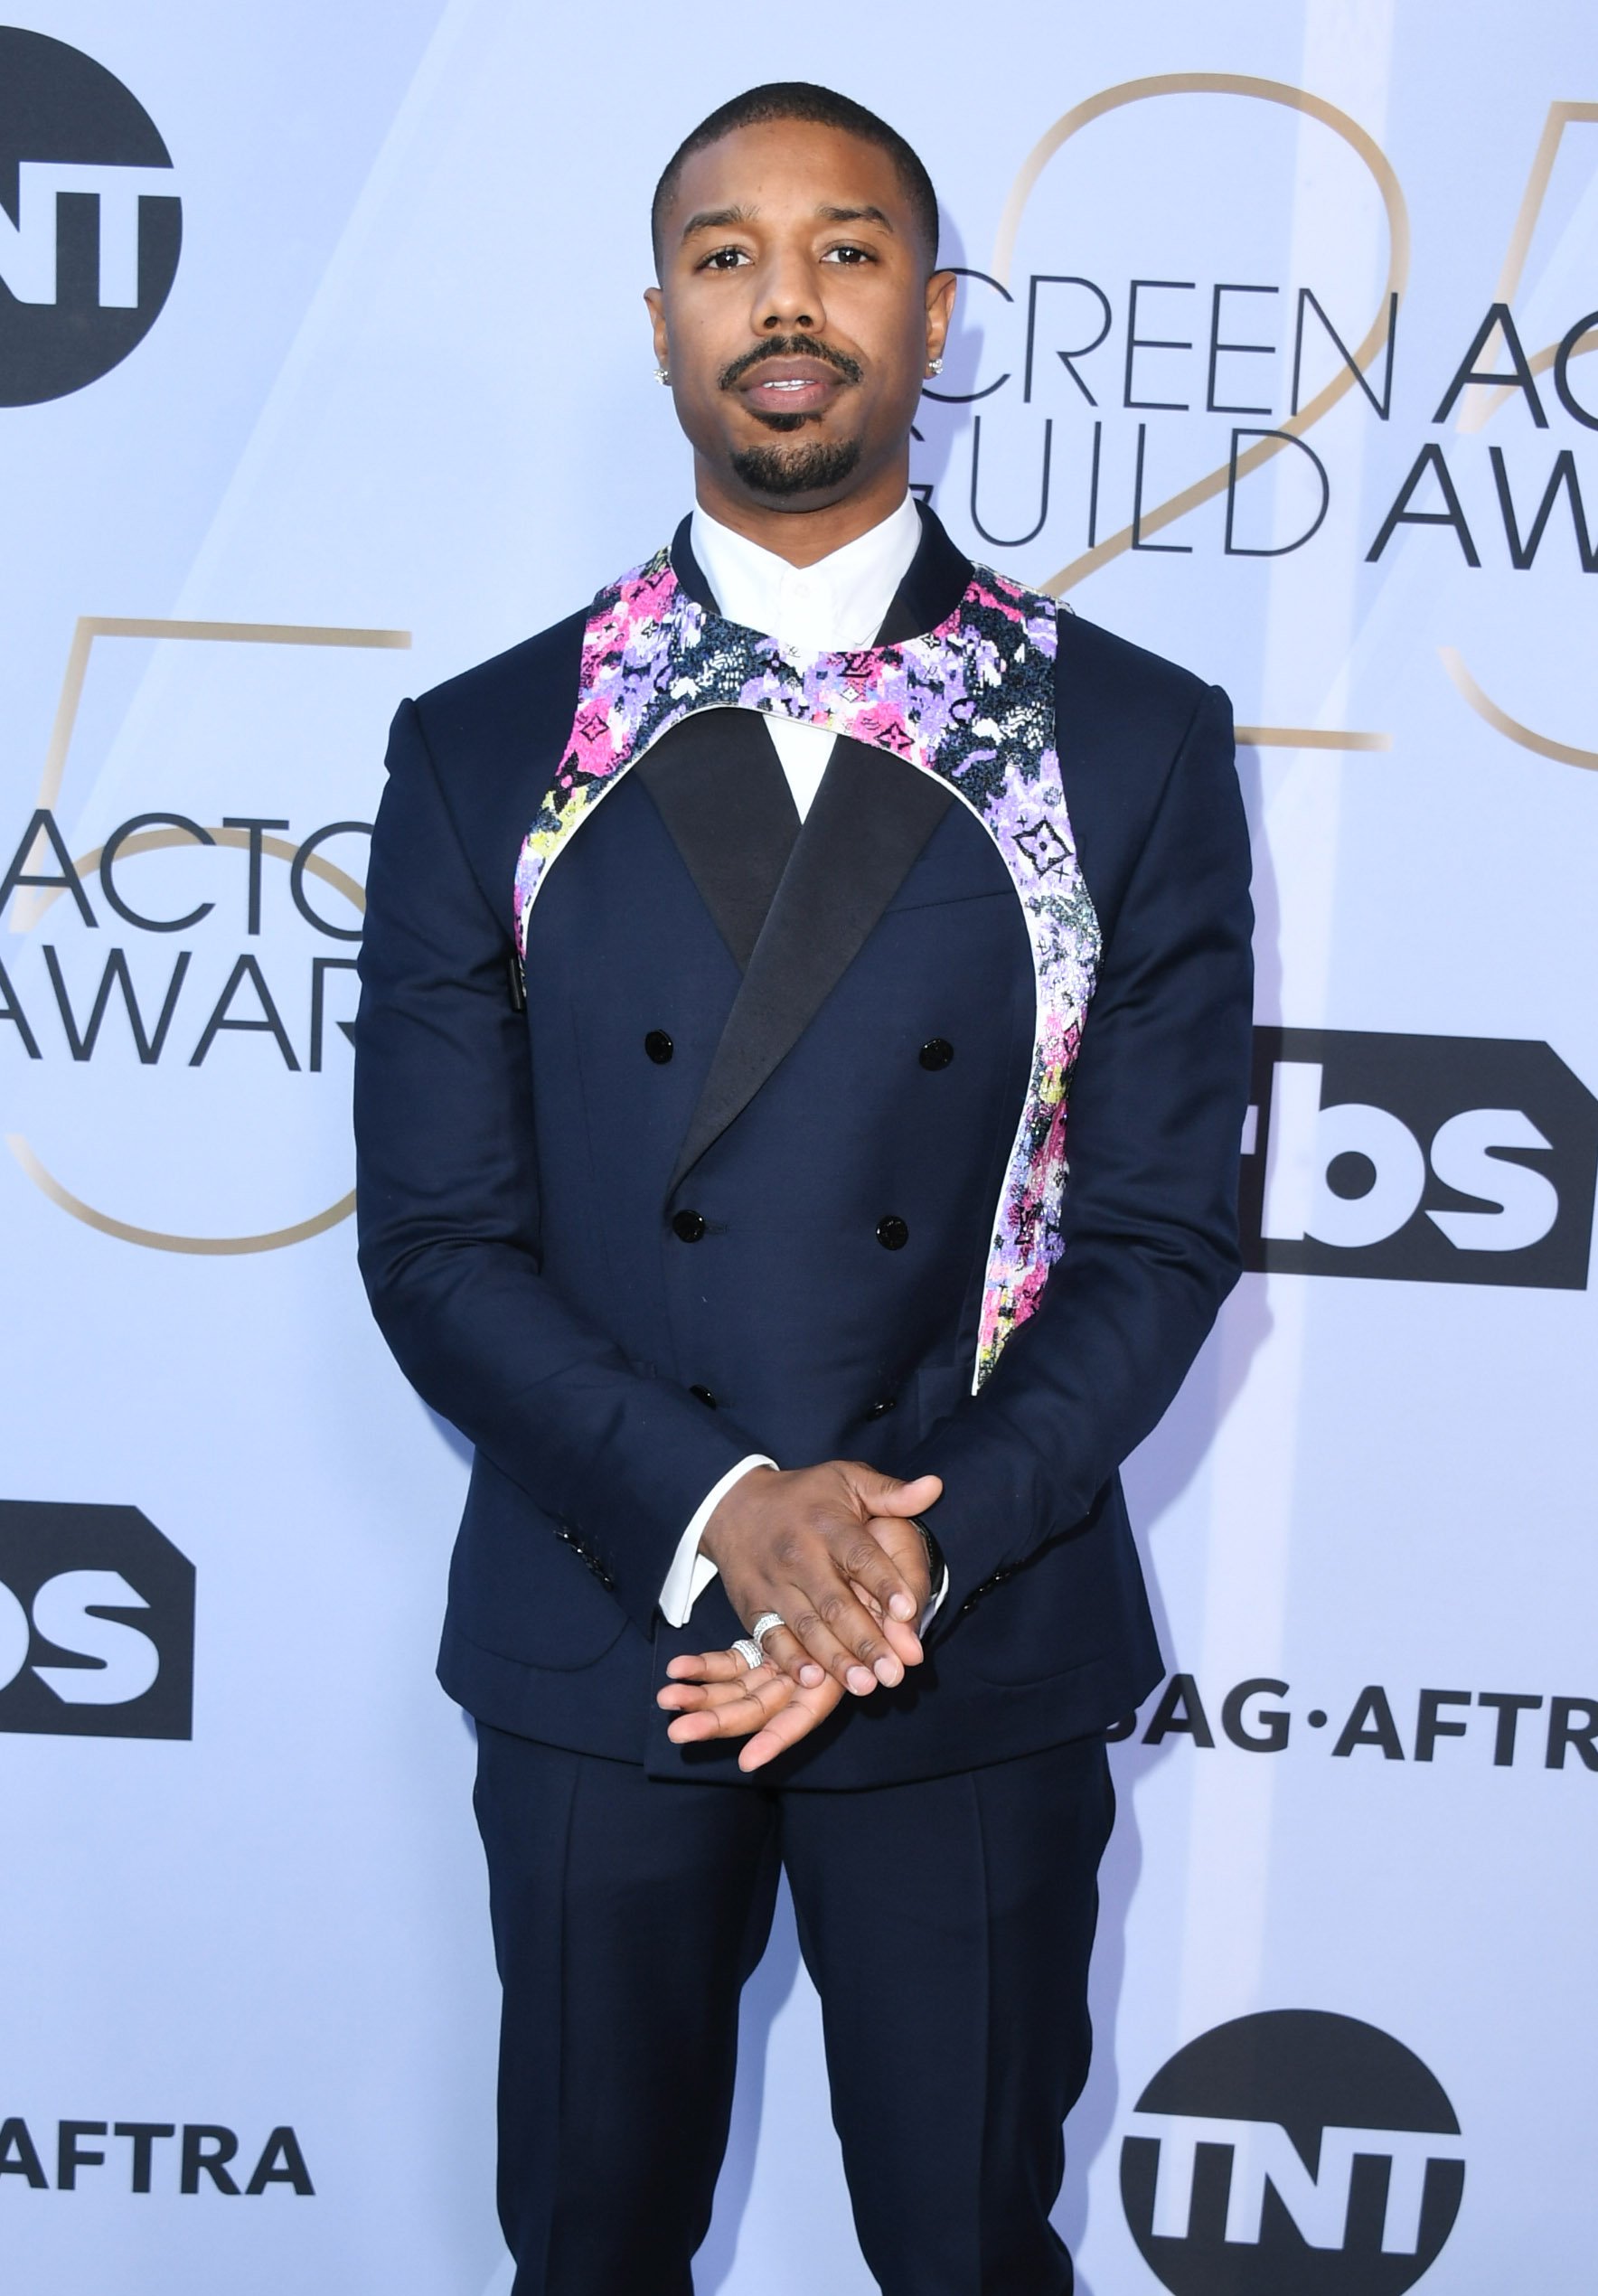 Michael B. Jordan at the 25th Annual Screen Actors Guild Awards in Los Angeles, California on Jan. 27. | Photo: Getty Images.